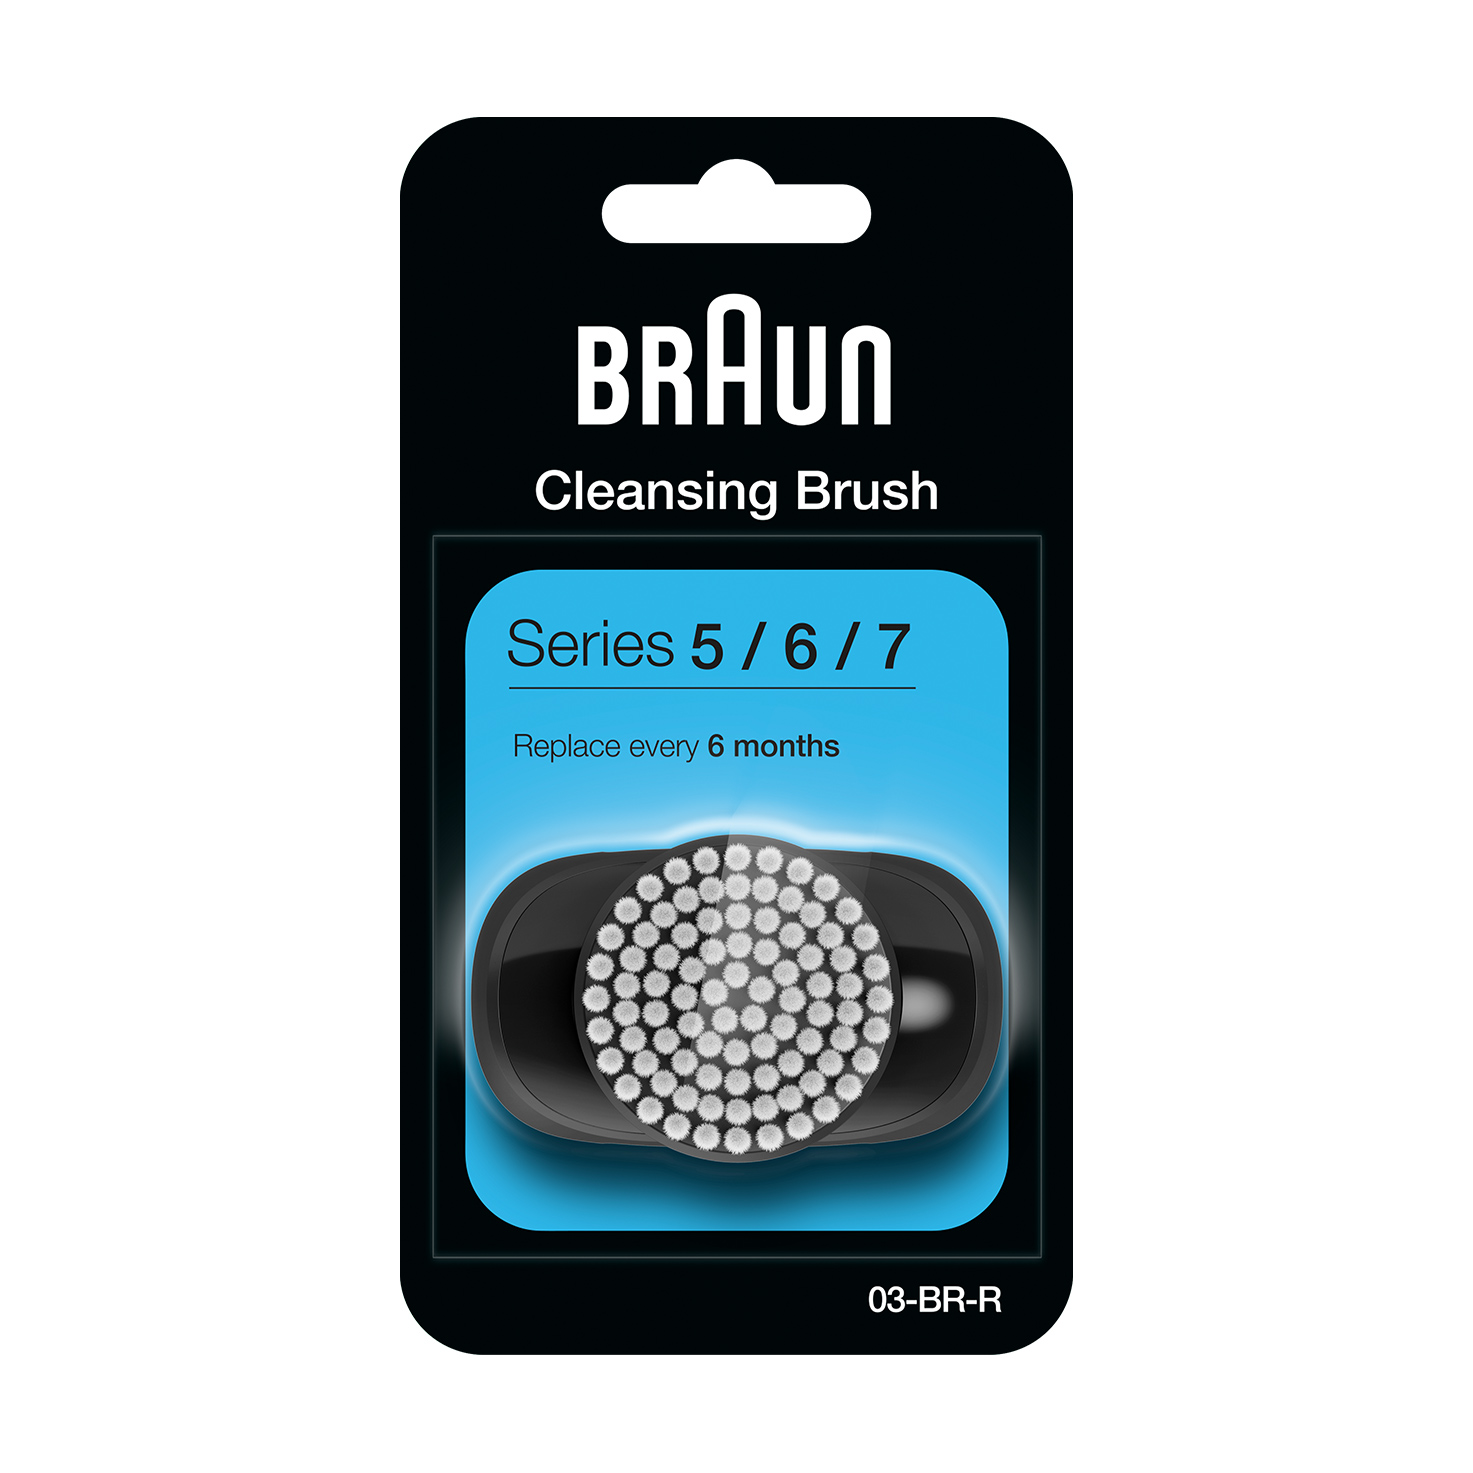 EasyClick Cleansing Brush refill for Braun Series 5, 6 and 7 electric shaver 